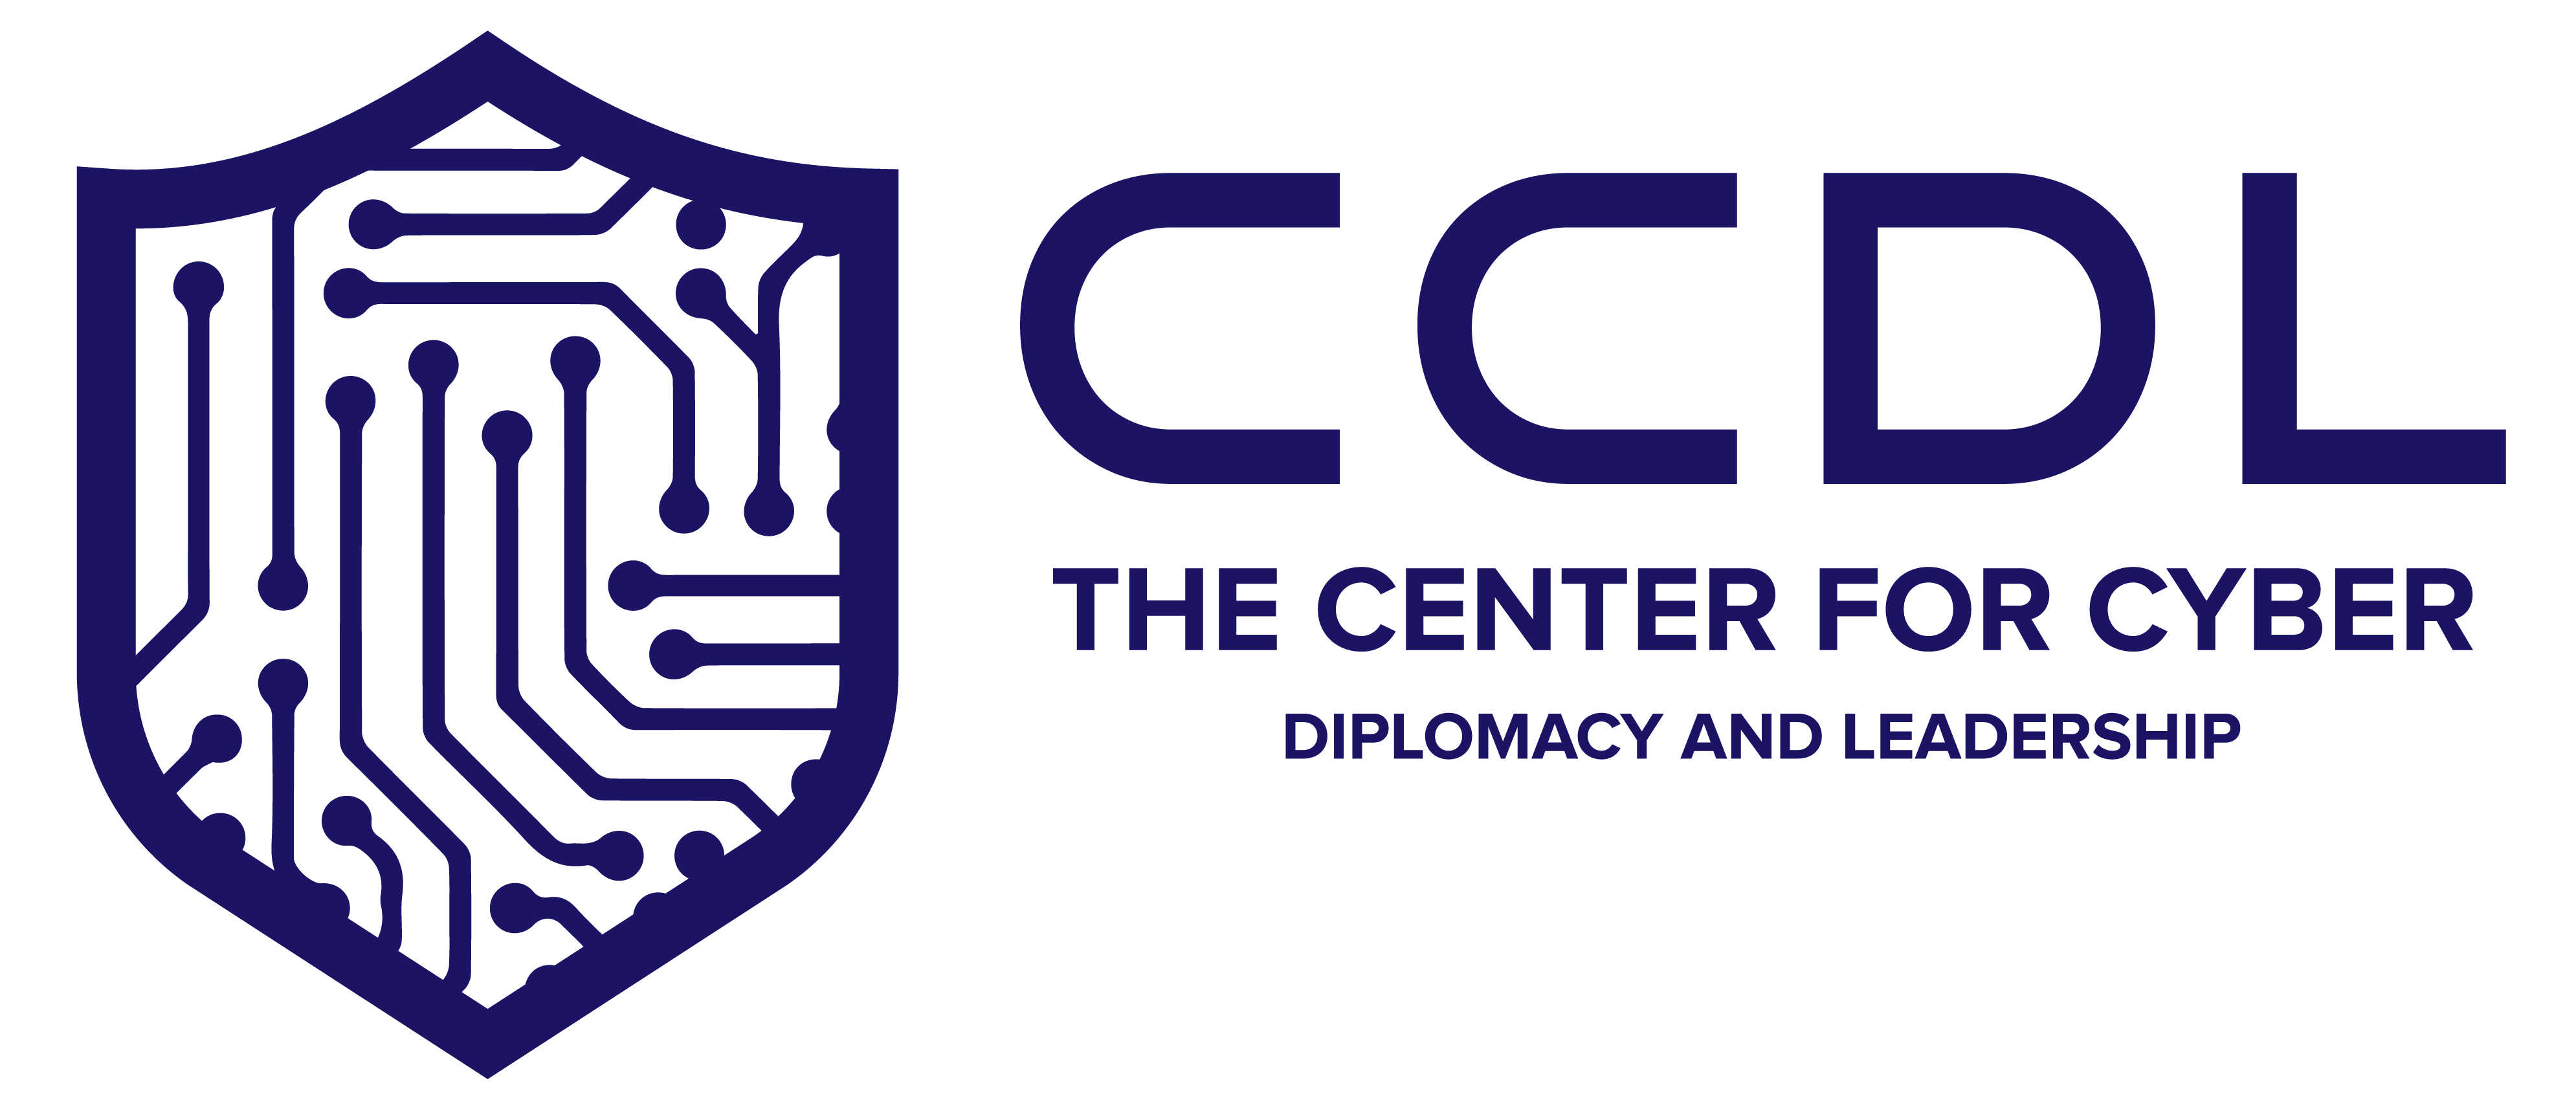 The Center for Cyber Diplomacy and Leadership (CCDL) Announces Strategic Partnership with George Washington University